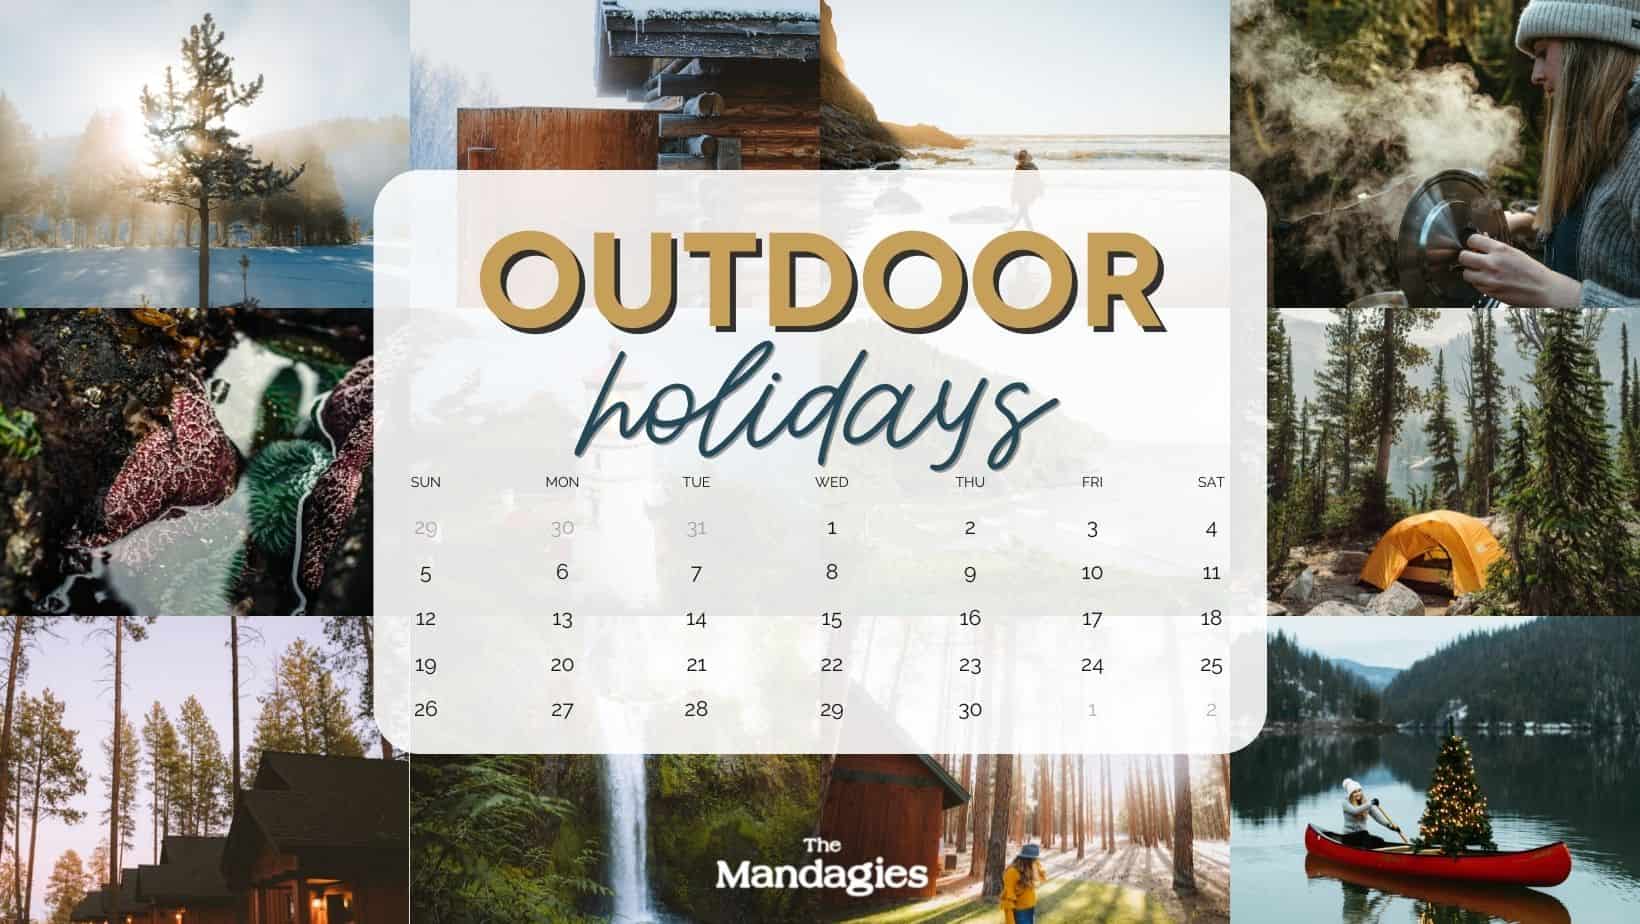 72 Adventurous Outdoor Holidays To Celebrate All Year